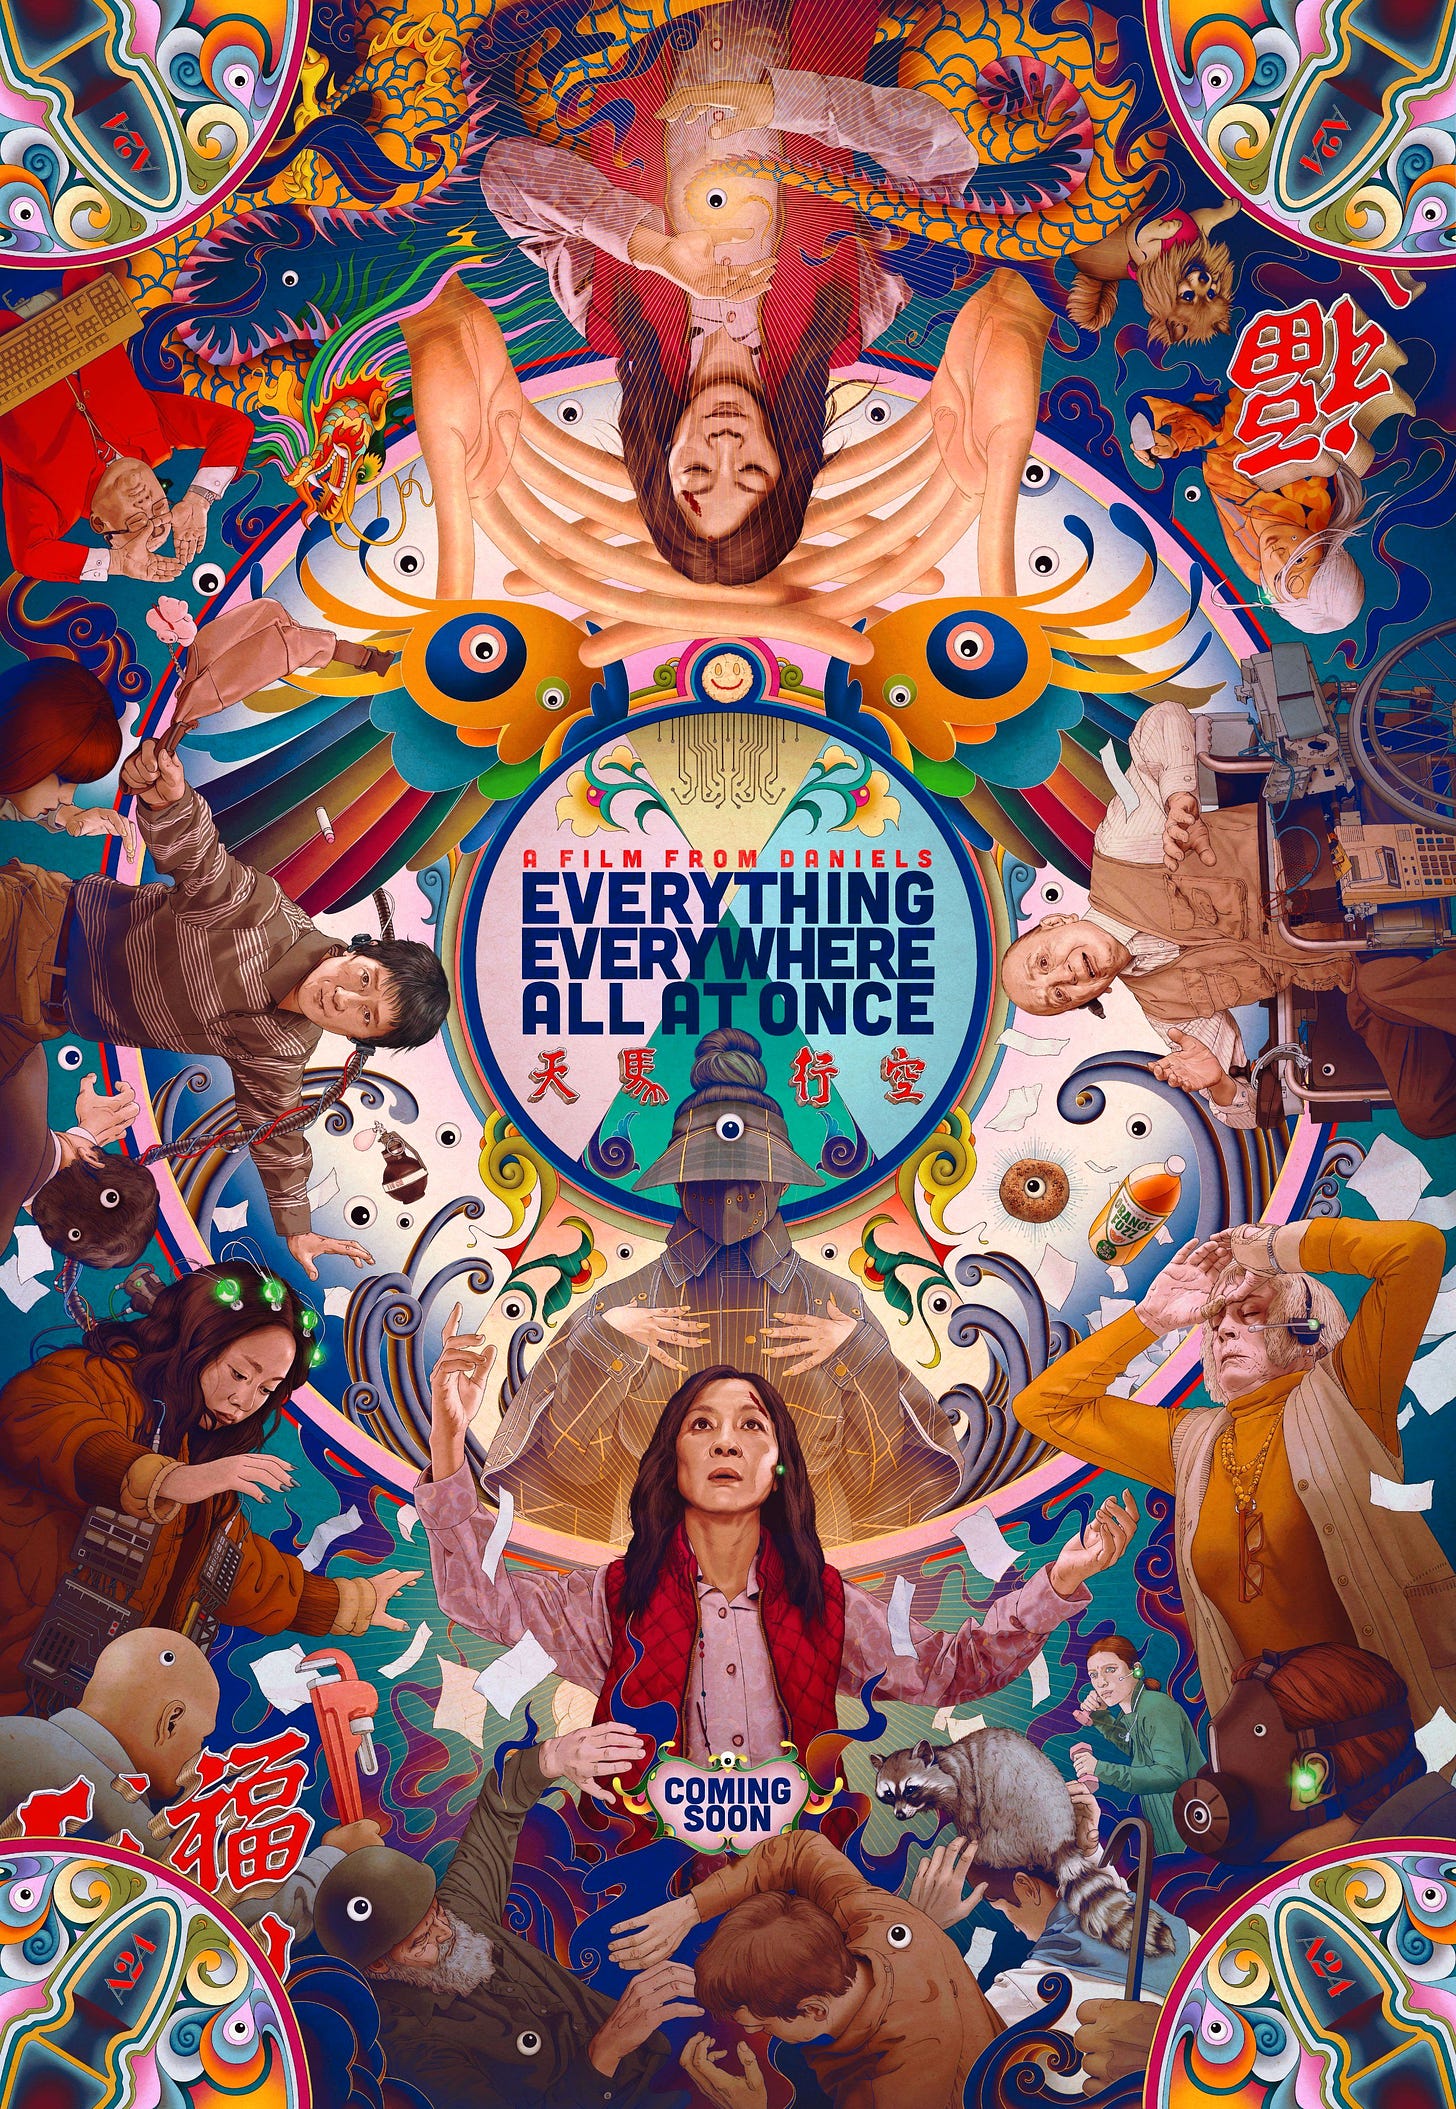 Everything Everywhere All at Once Poster is a Mind-Melting I Spy Game